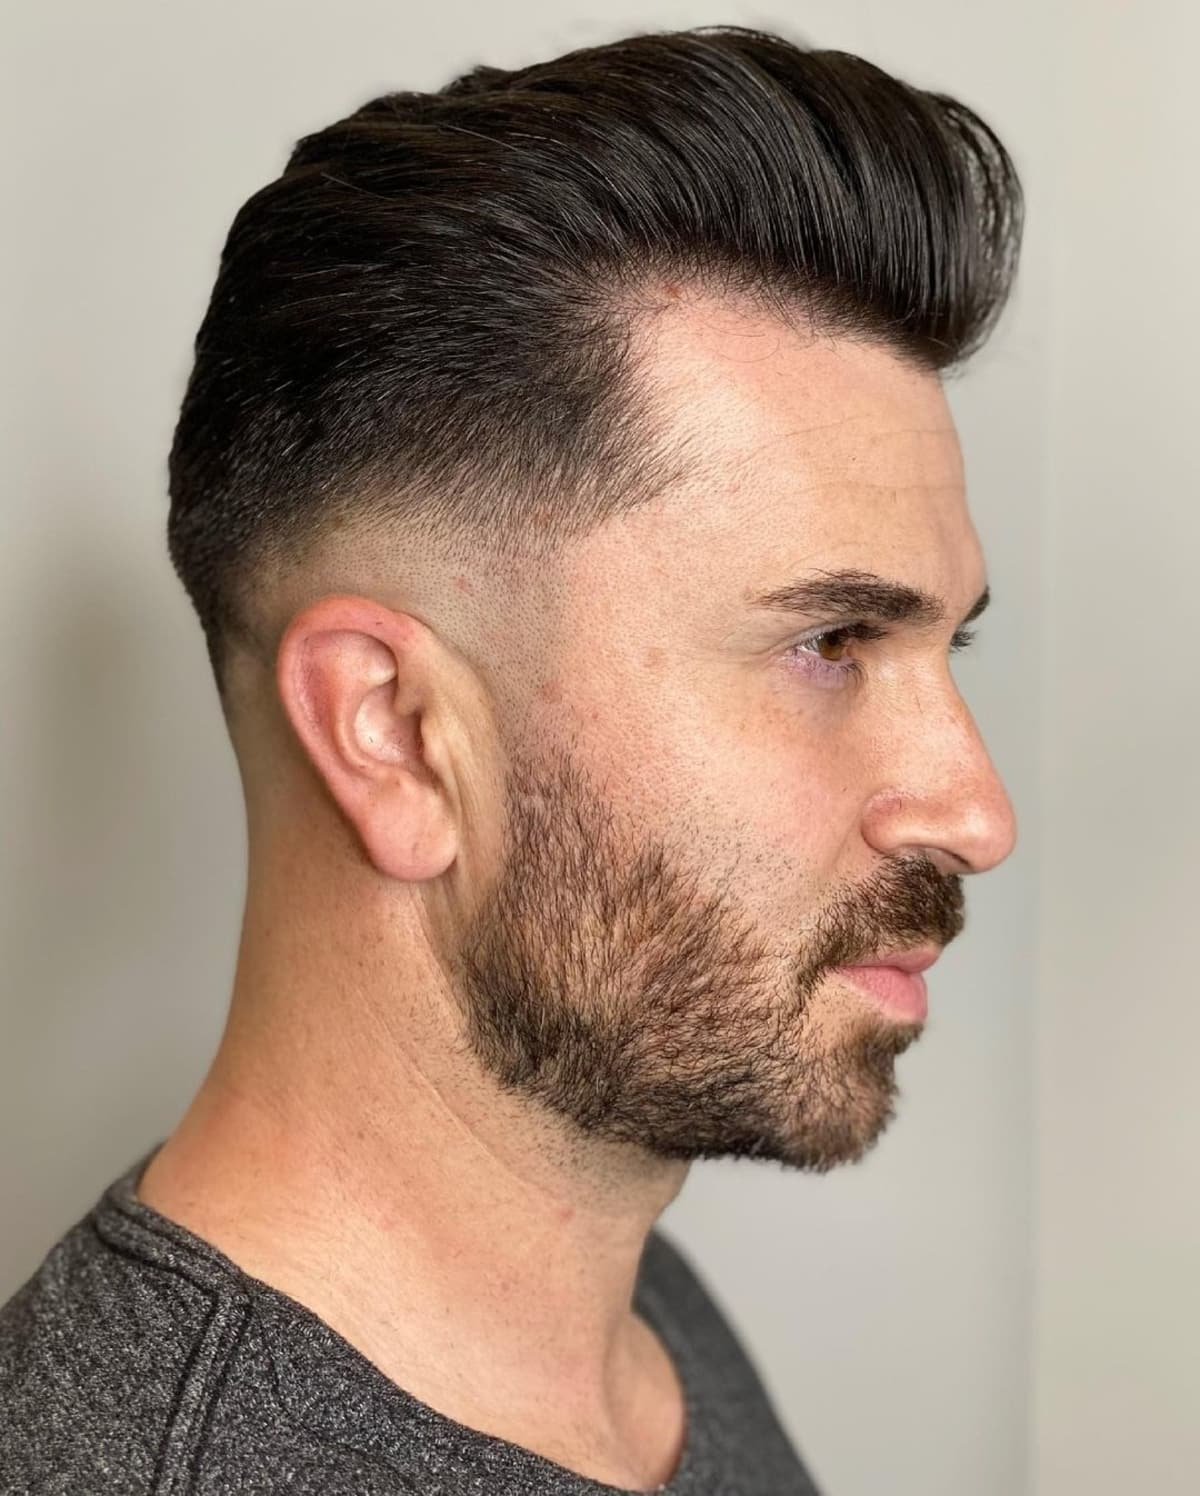 Low taper fade pomp on thin hair